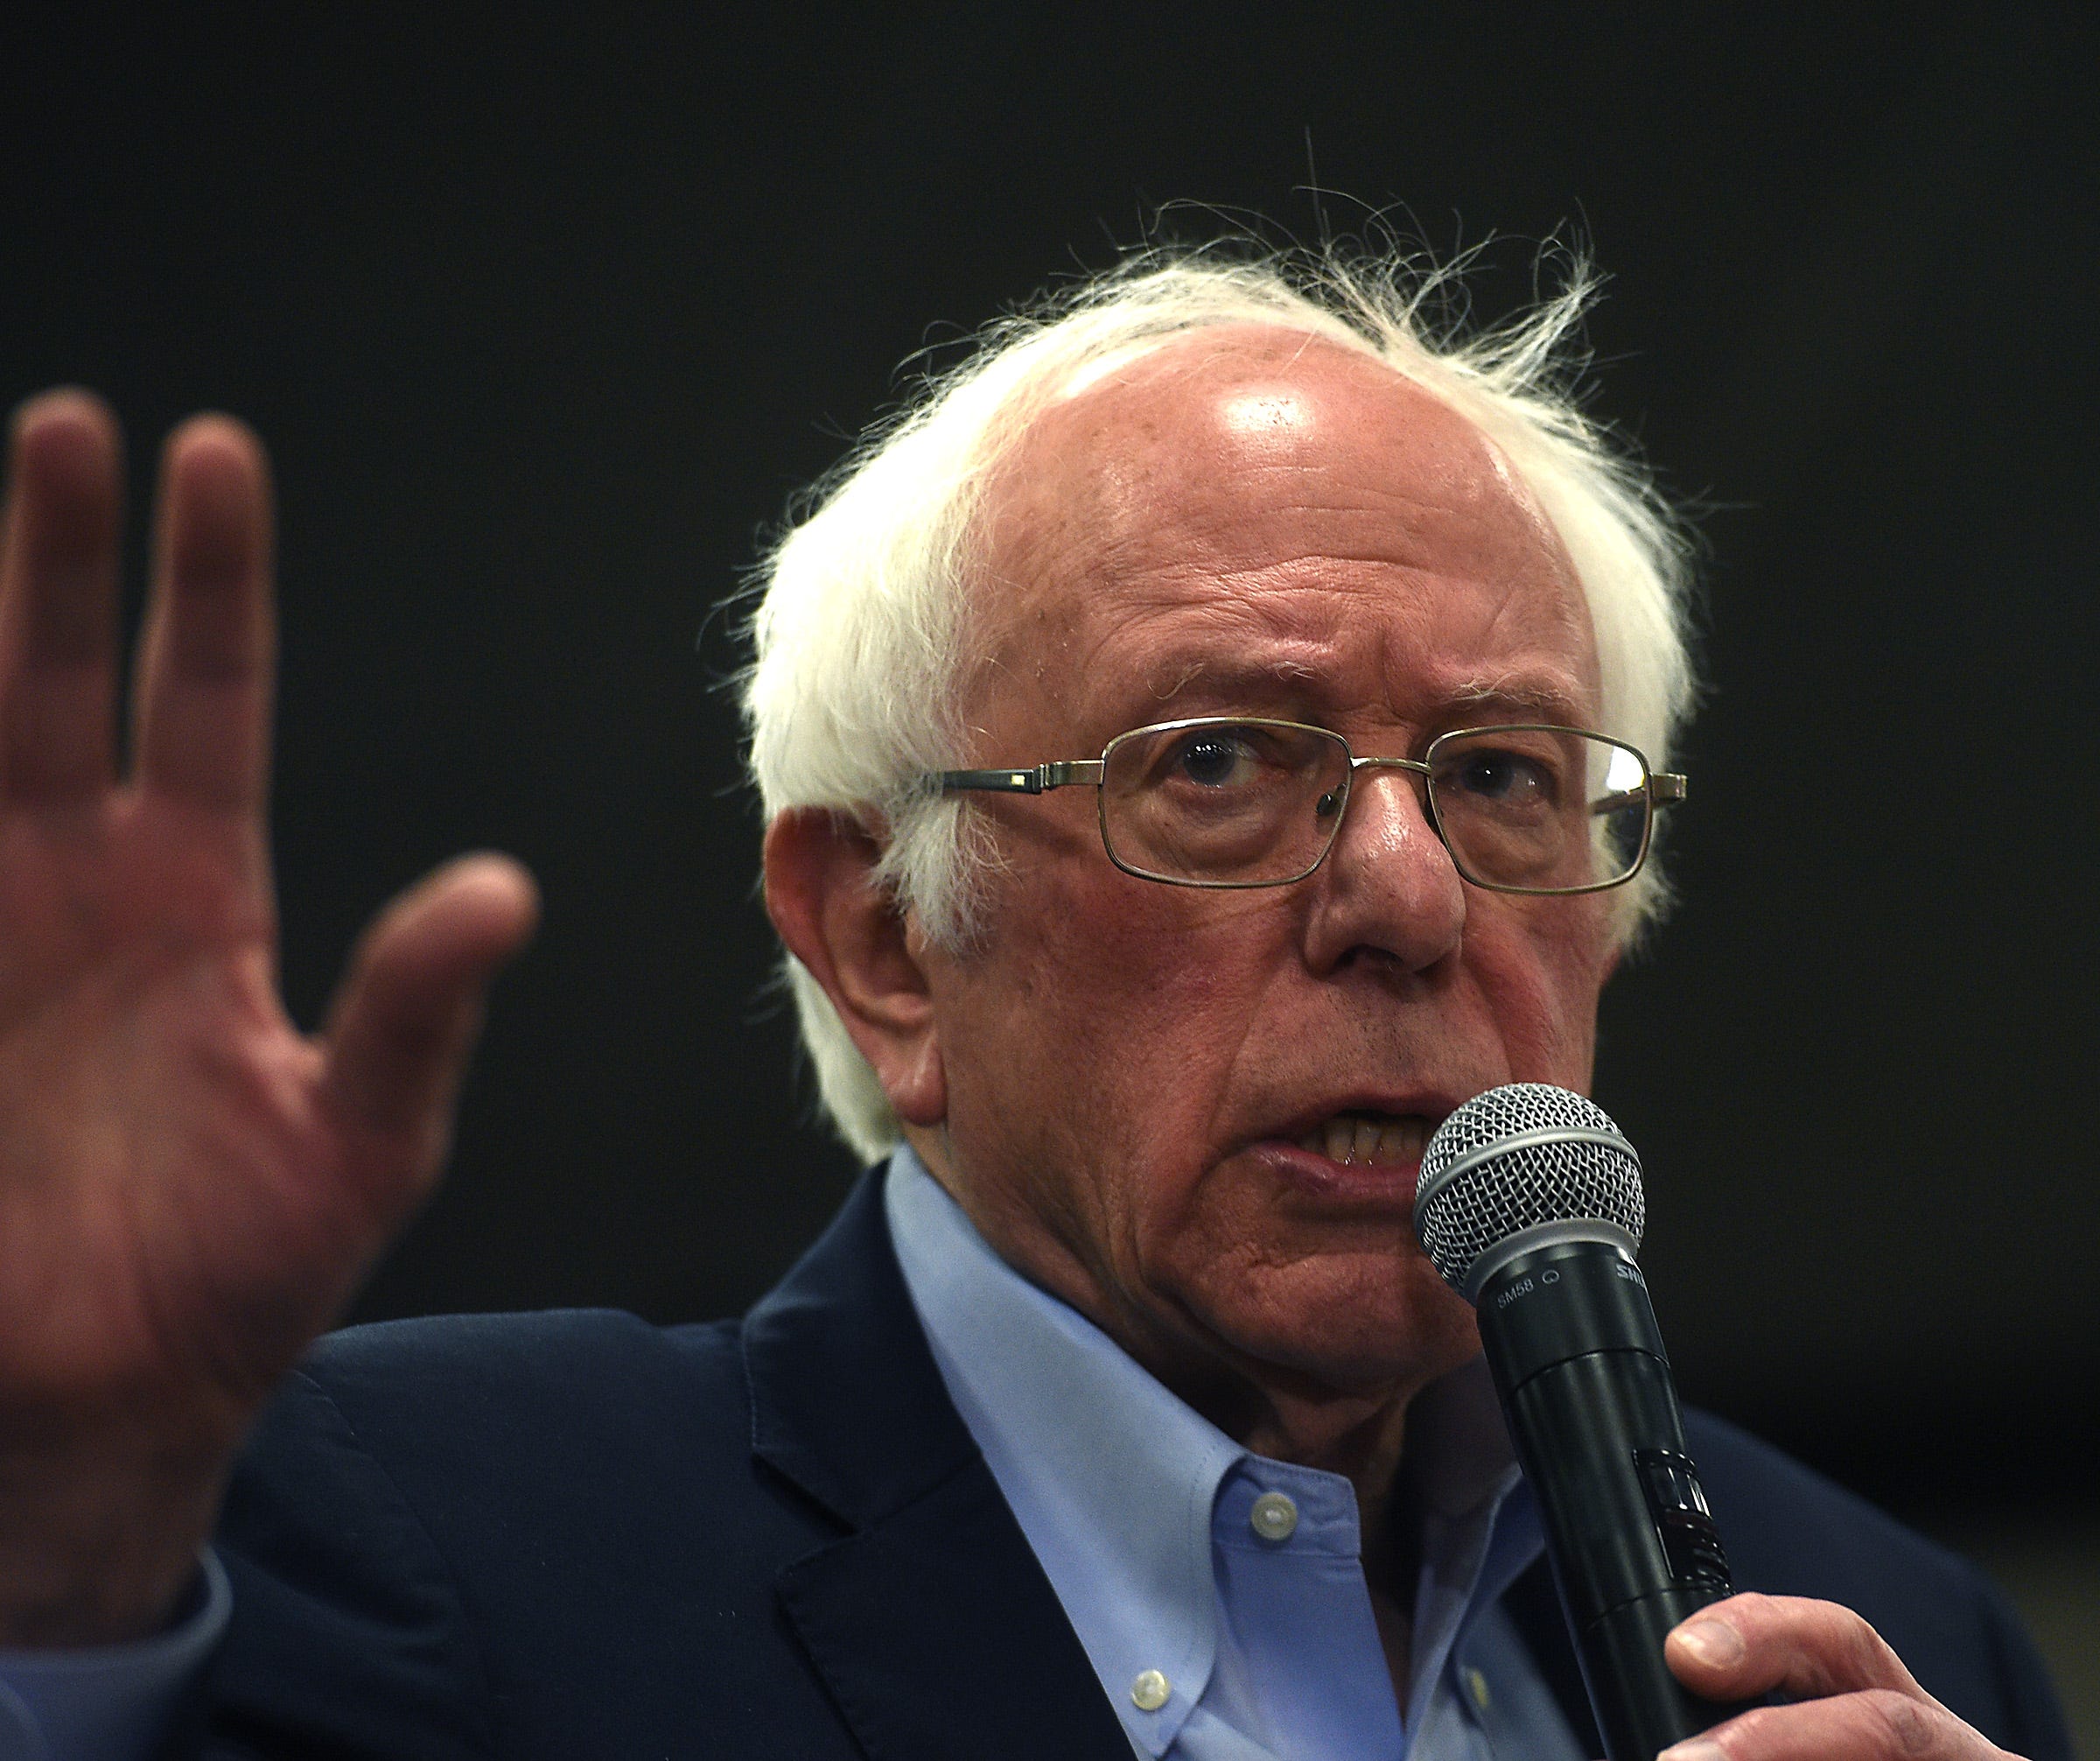 Bernie Sanders And Unions To Hold Working Class Rally To Fight Corporate Greed